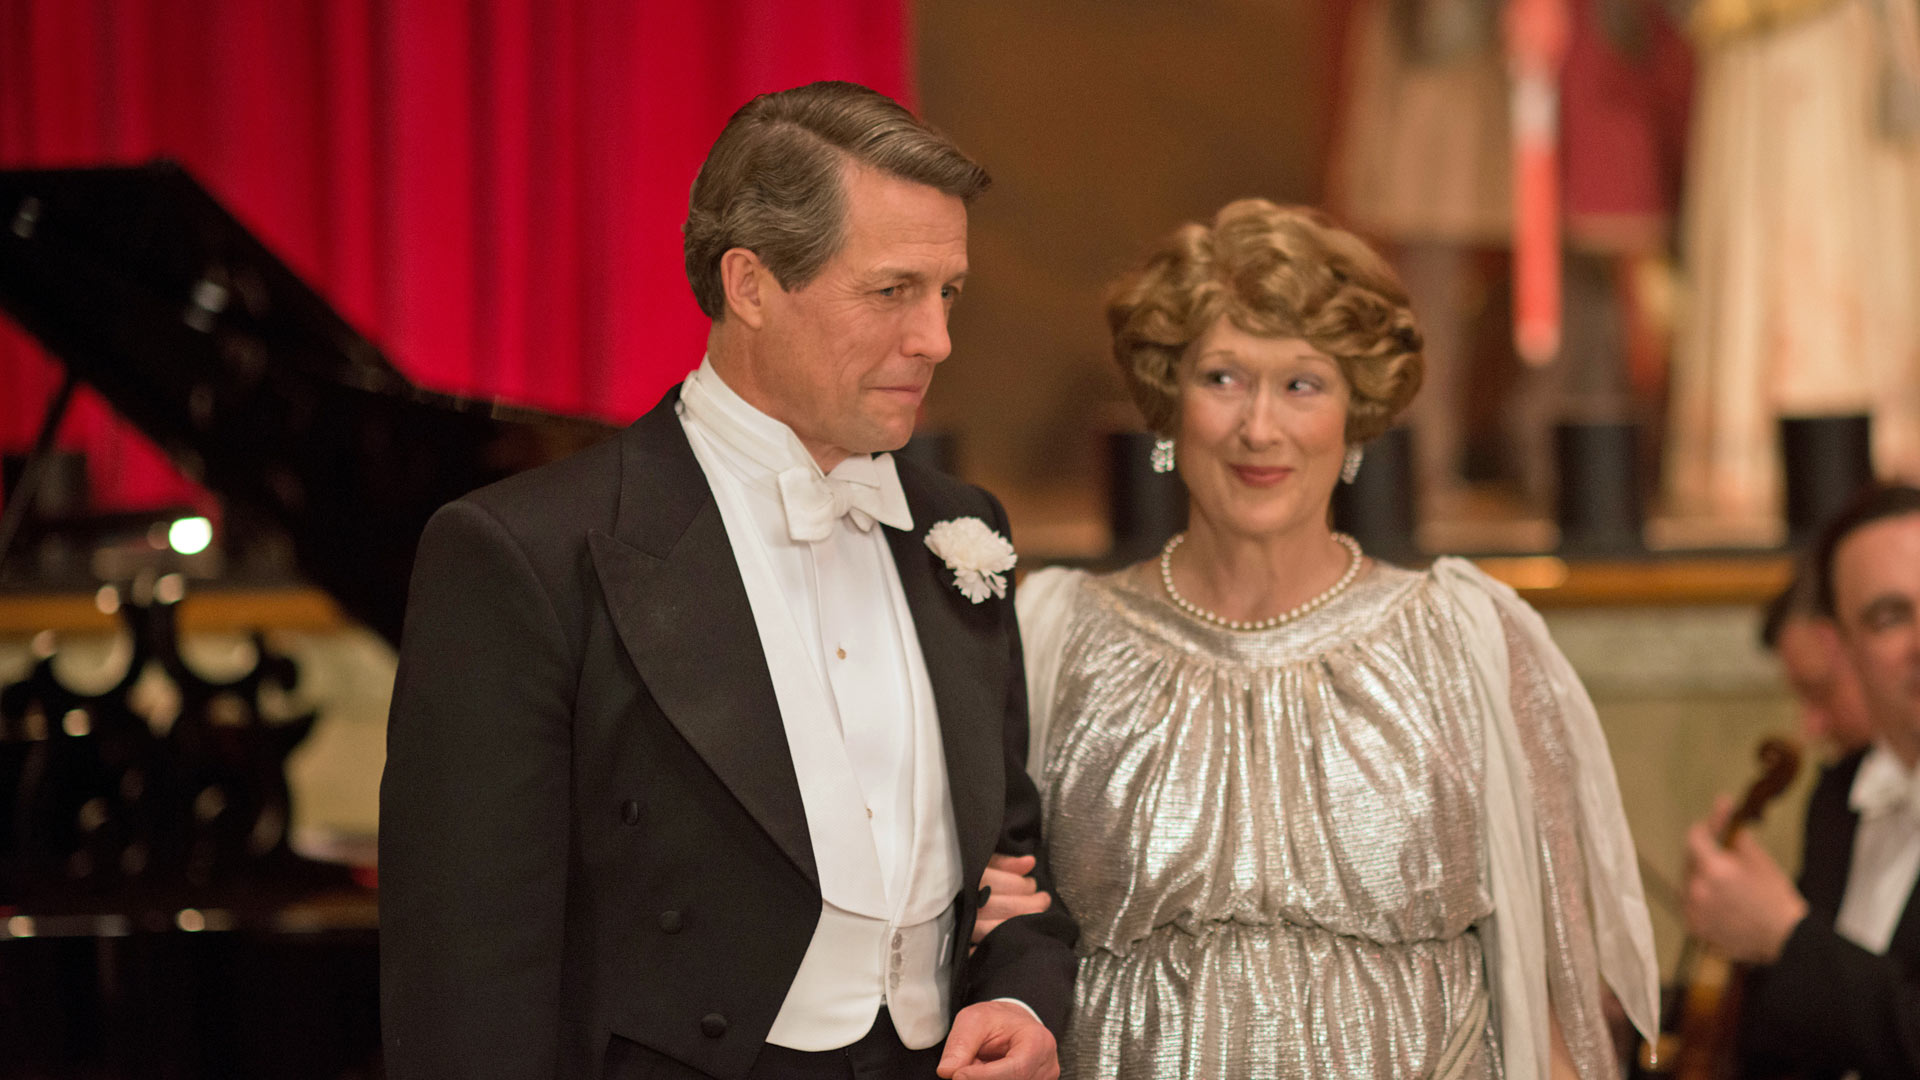 Hugh Grant and Meryl Streep in "Florence Foster Jenkins"